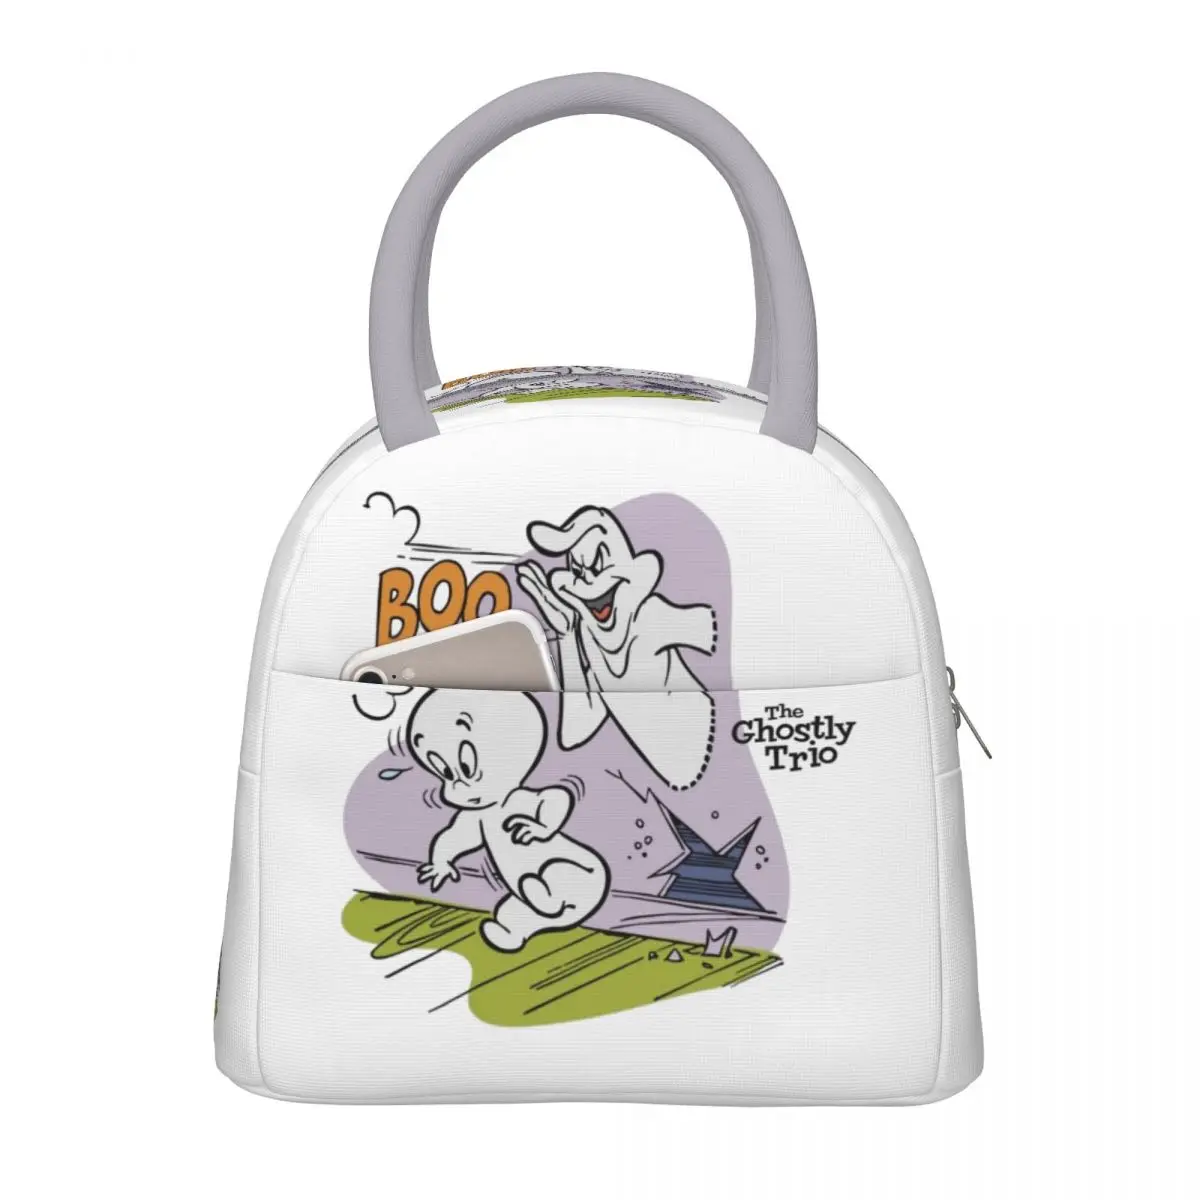 

Casper The Friendly Ghost Thermal Insulated Lunch Bags for Work Portable Bento Box Cooler Thermal Lunch Boxes